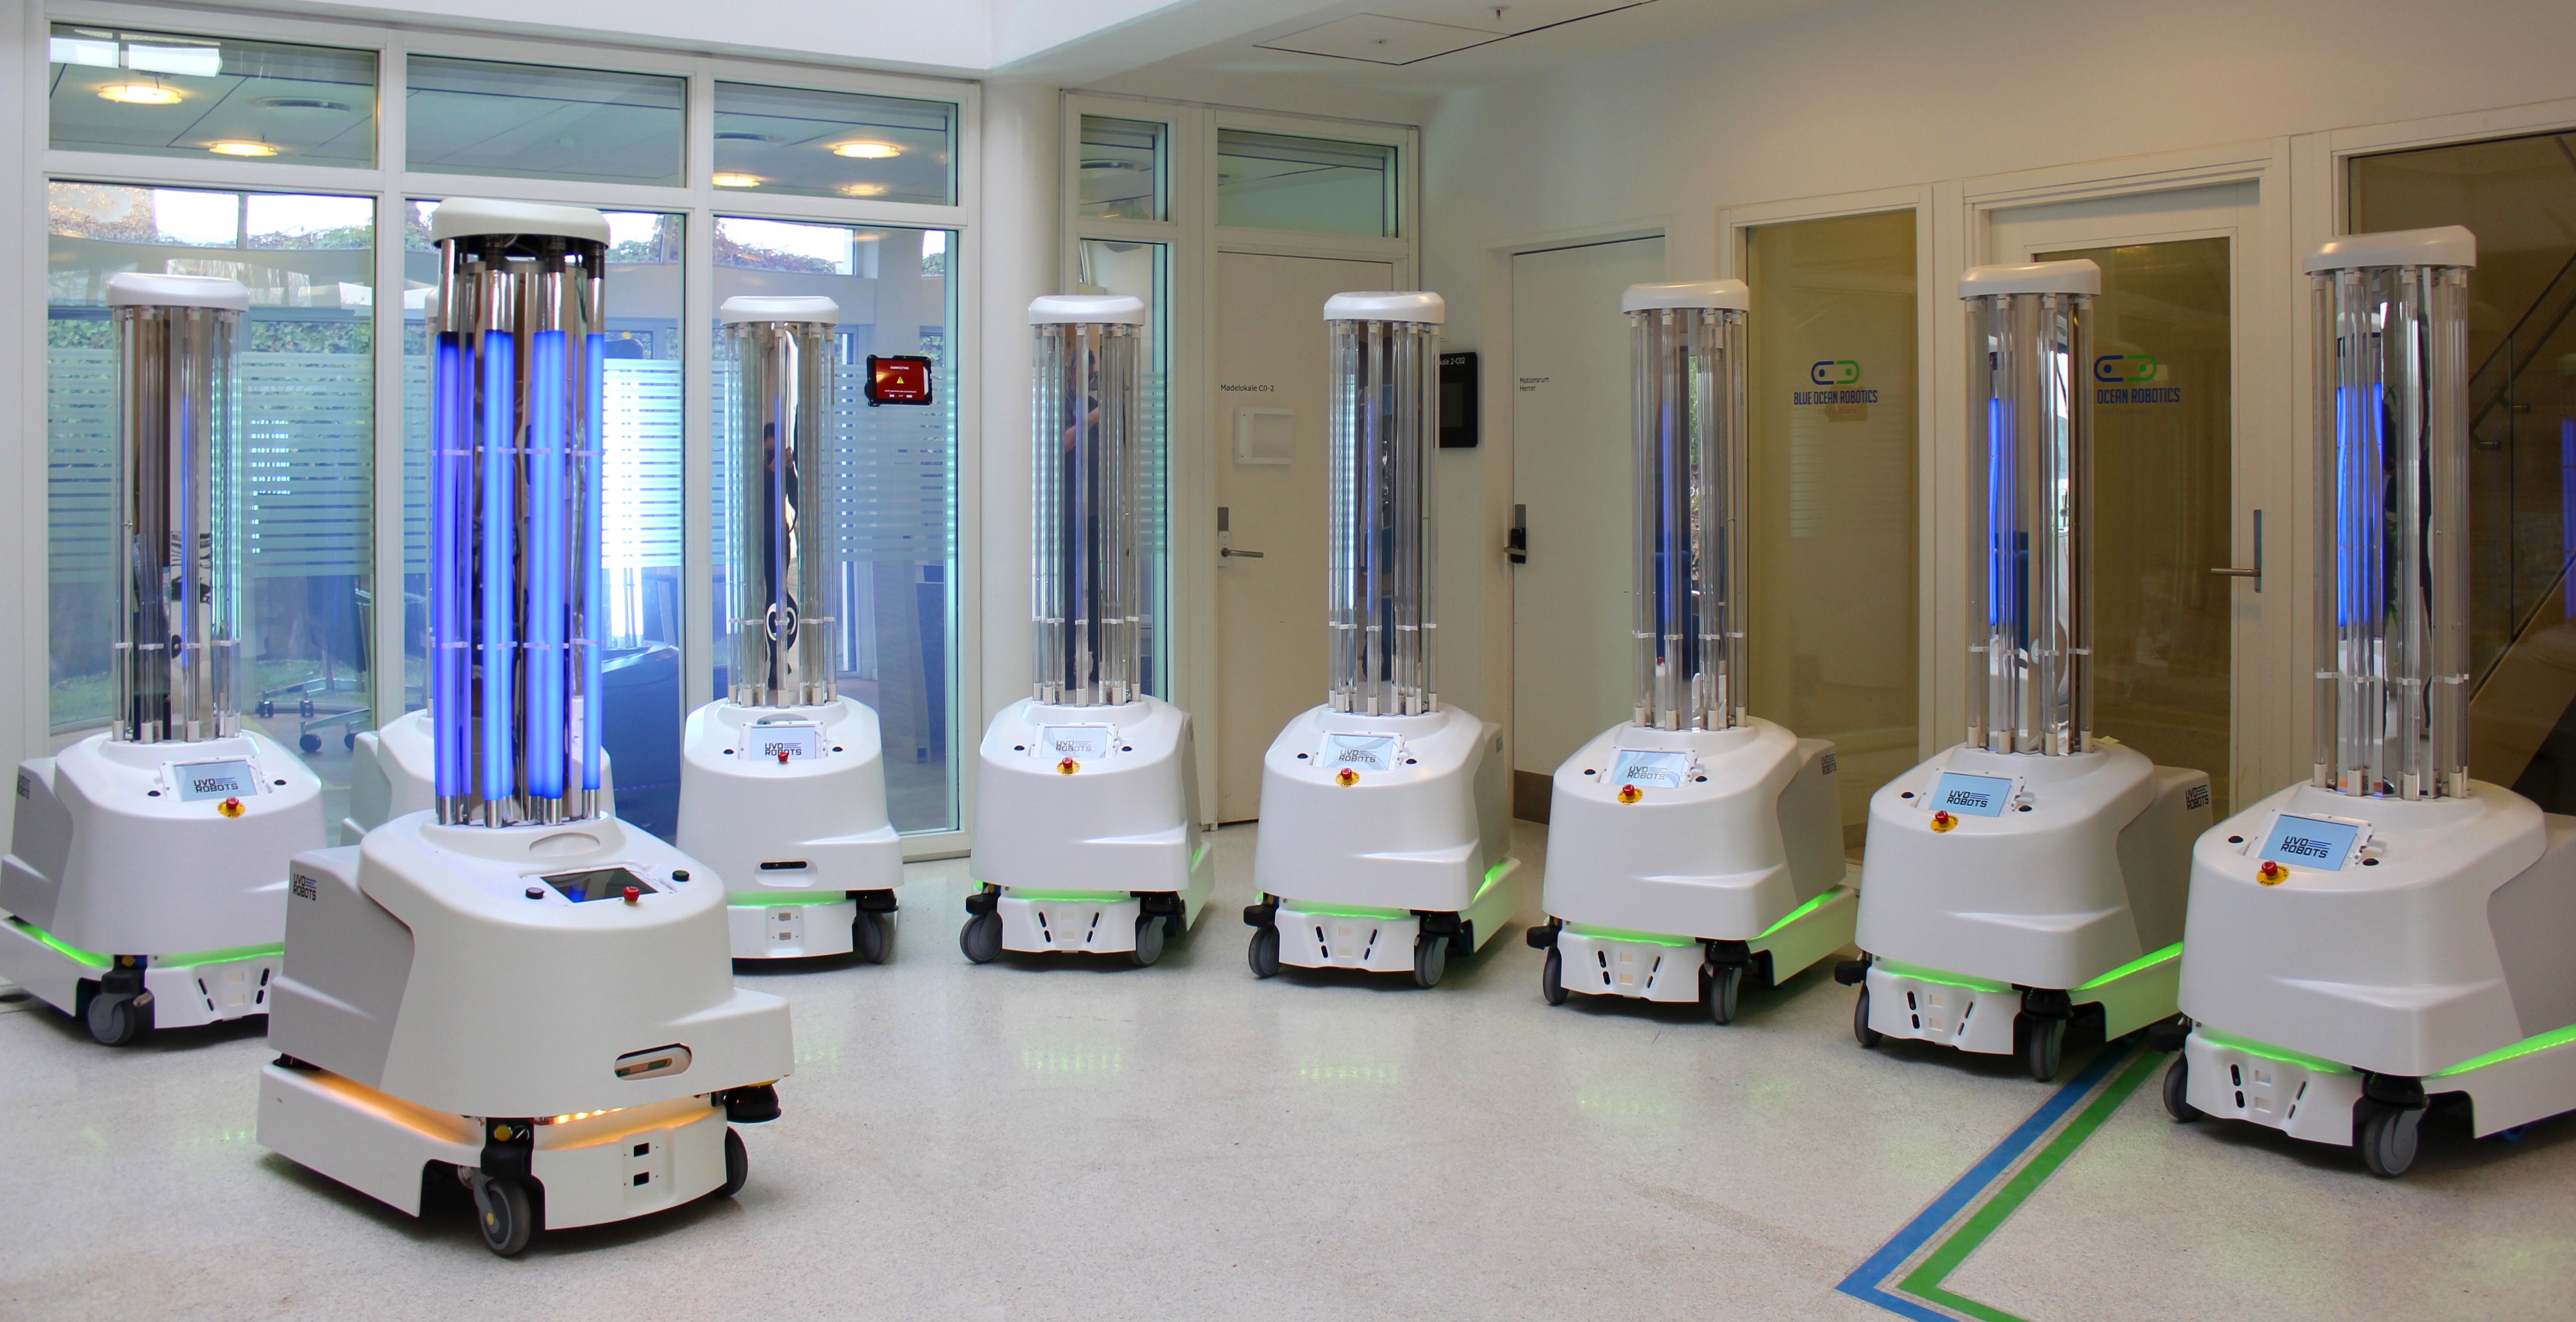 The self-driving ultraviolent disinfection robots are being tested for their effectiveness against coronavirus. Image credit: Blue Ocean Robotics and UVD Robots